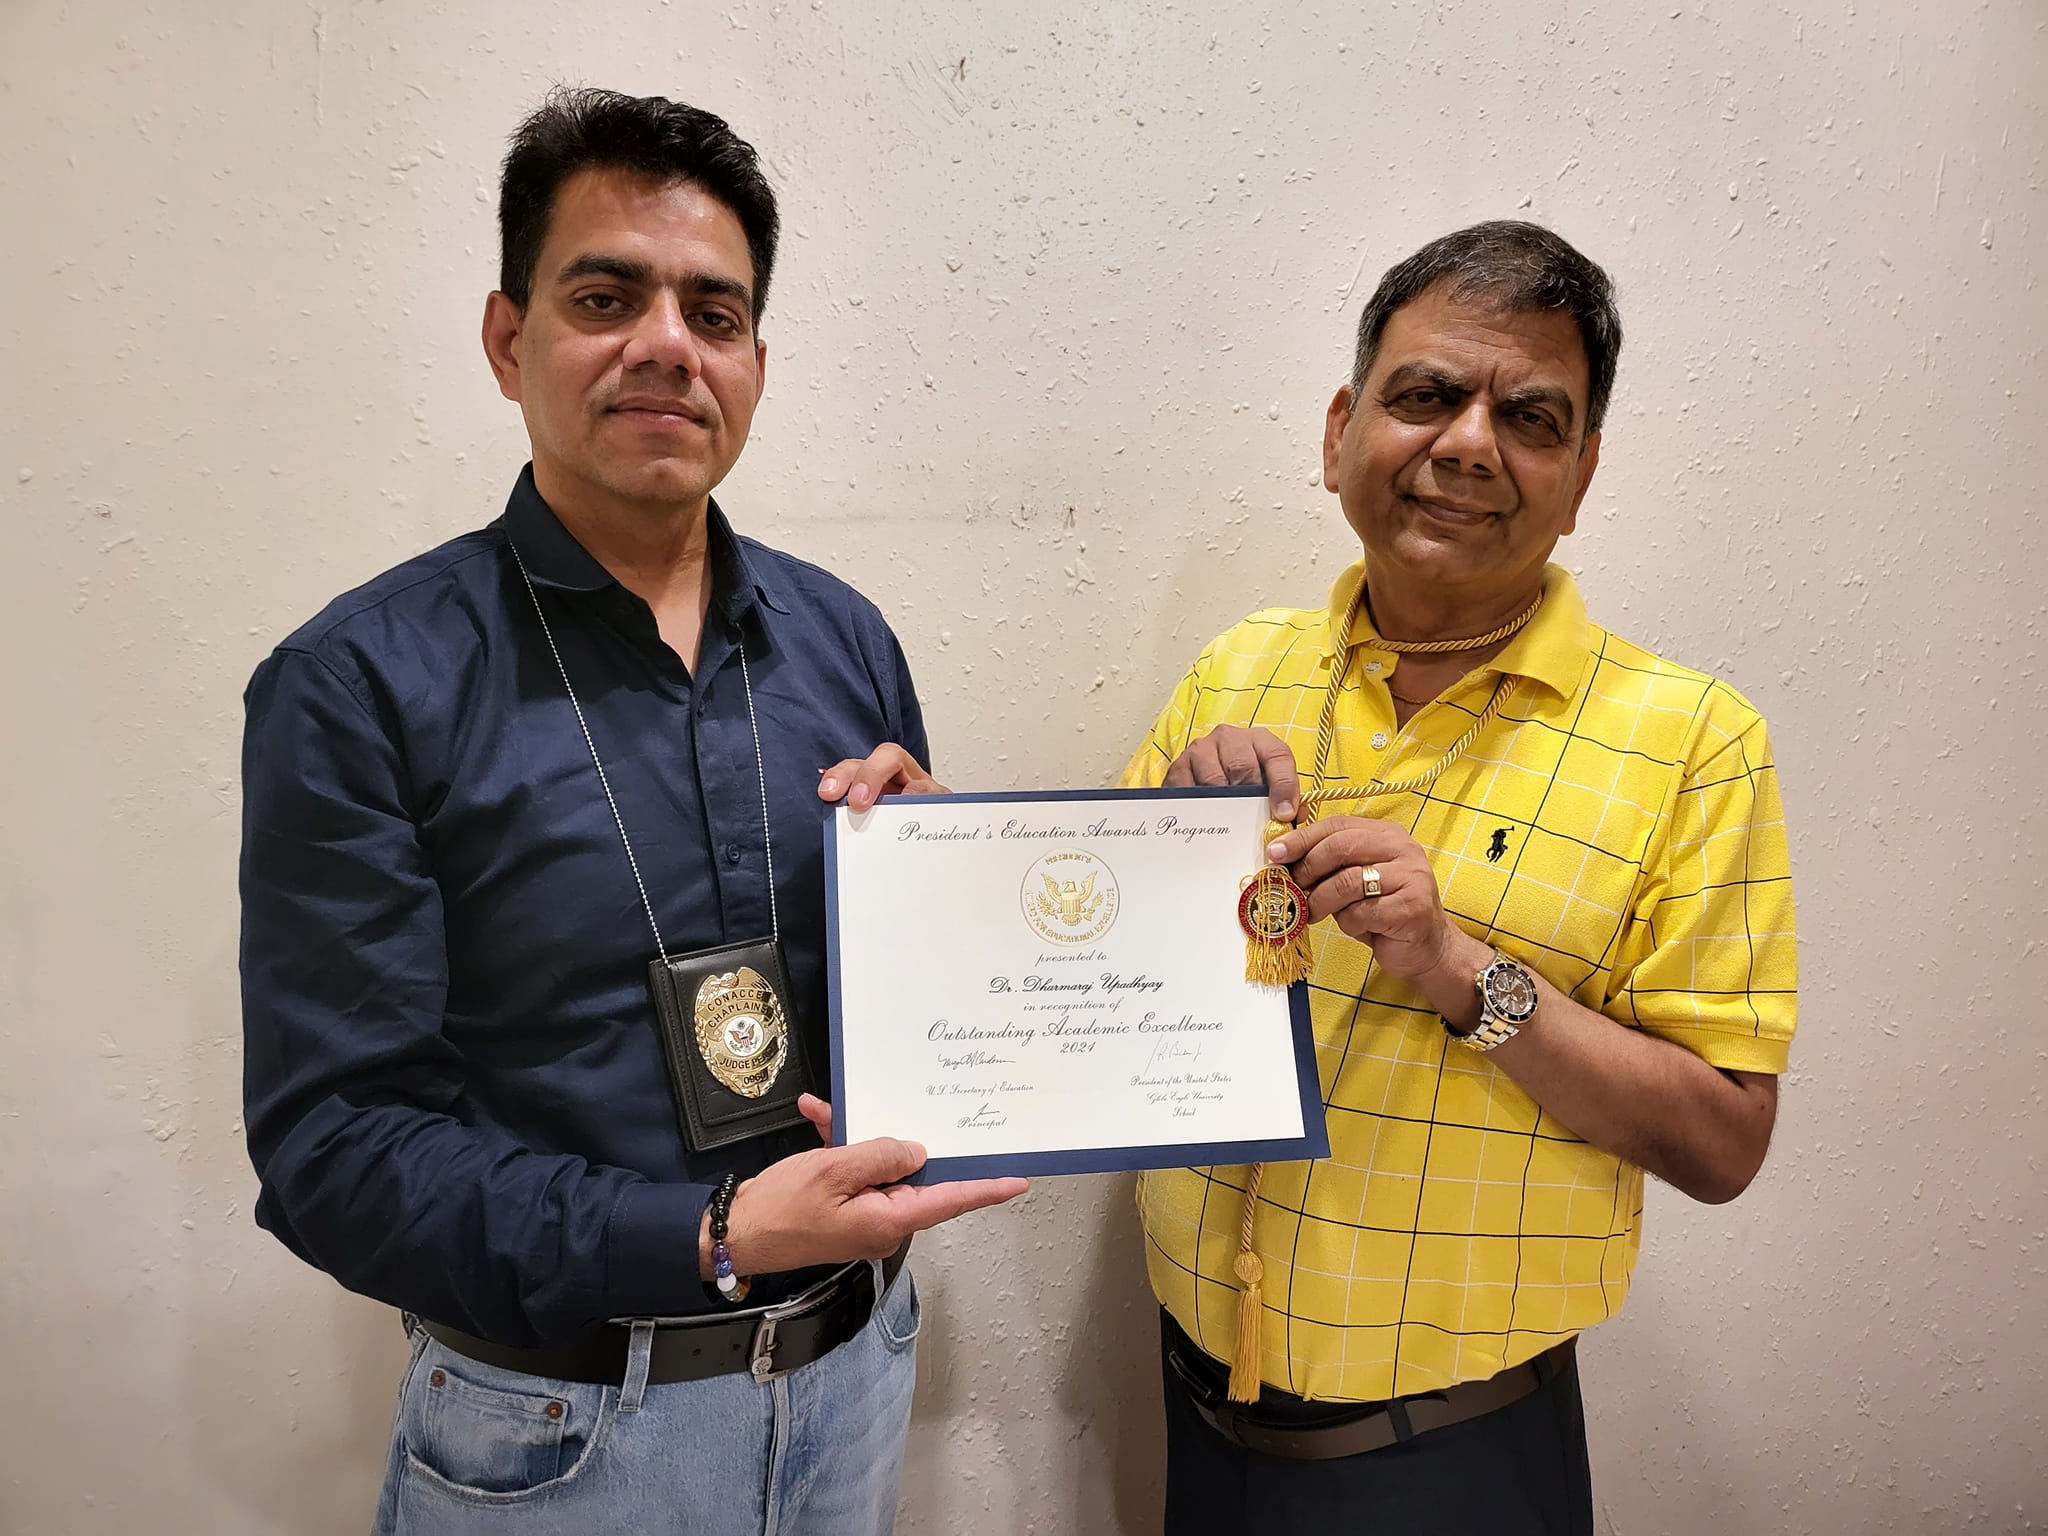 World renowned lyricist Dr. Upadhyay awarded US ‘President’s Award of Education Excellence’